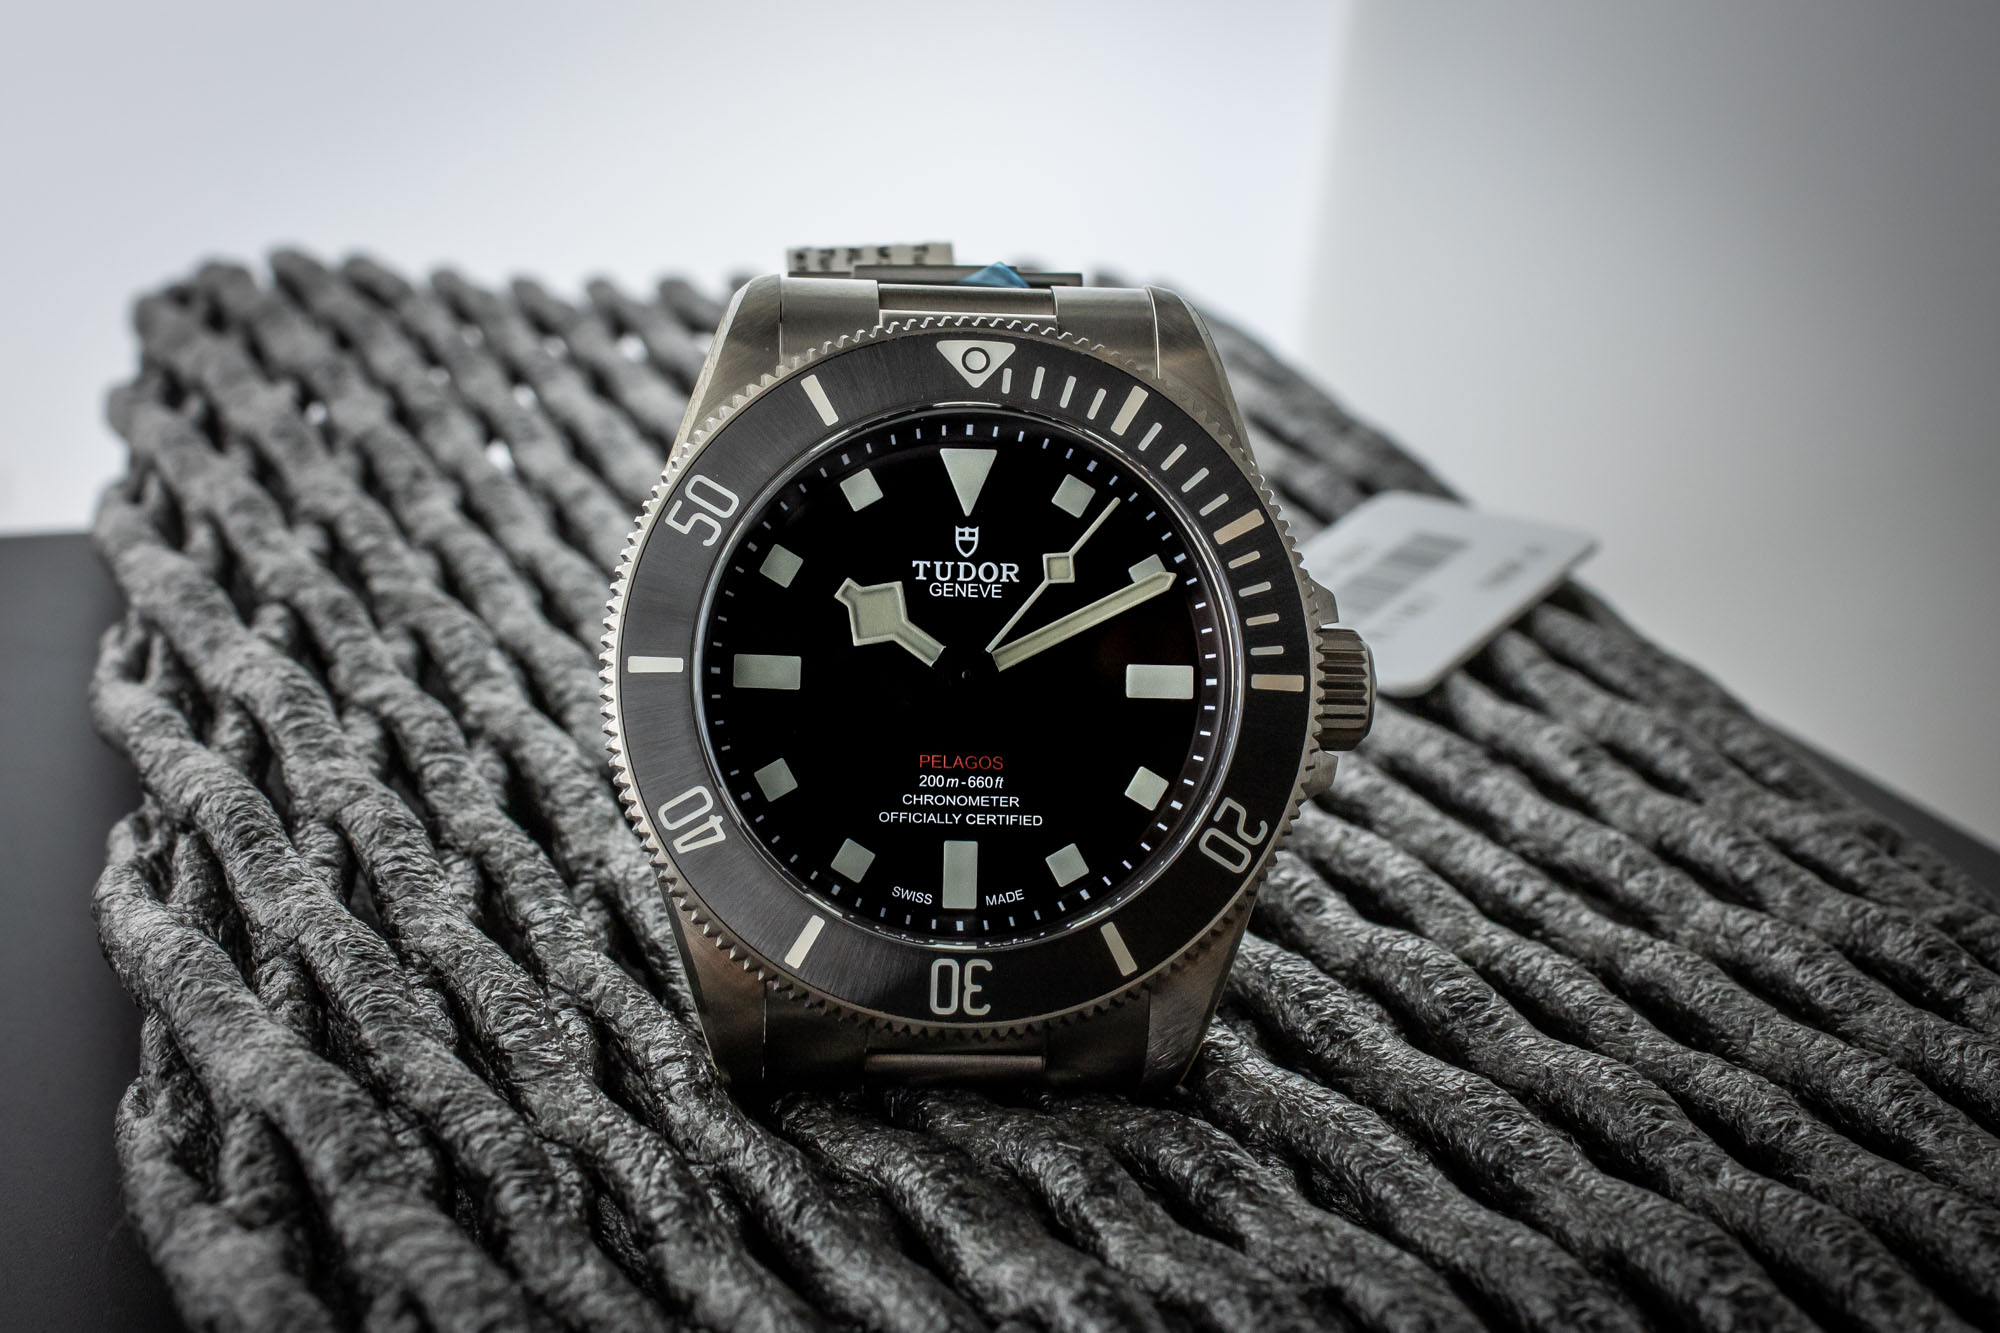 Opinion: What to think about the Tudor North Flag - Hands-on review with  specs & price - Monochrome-Watches